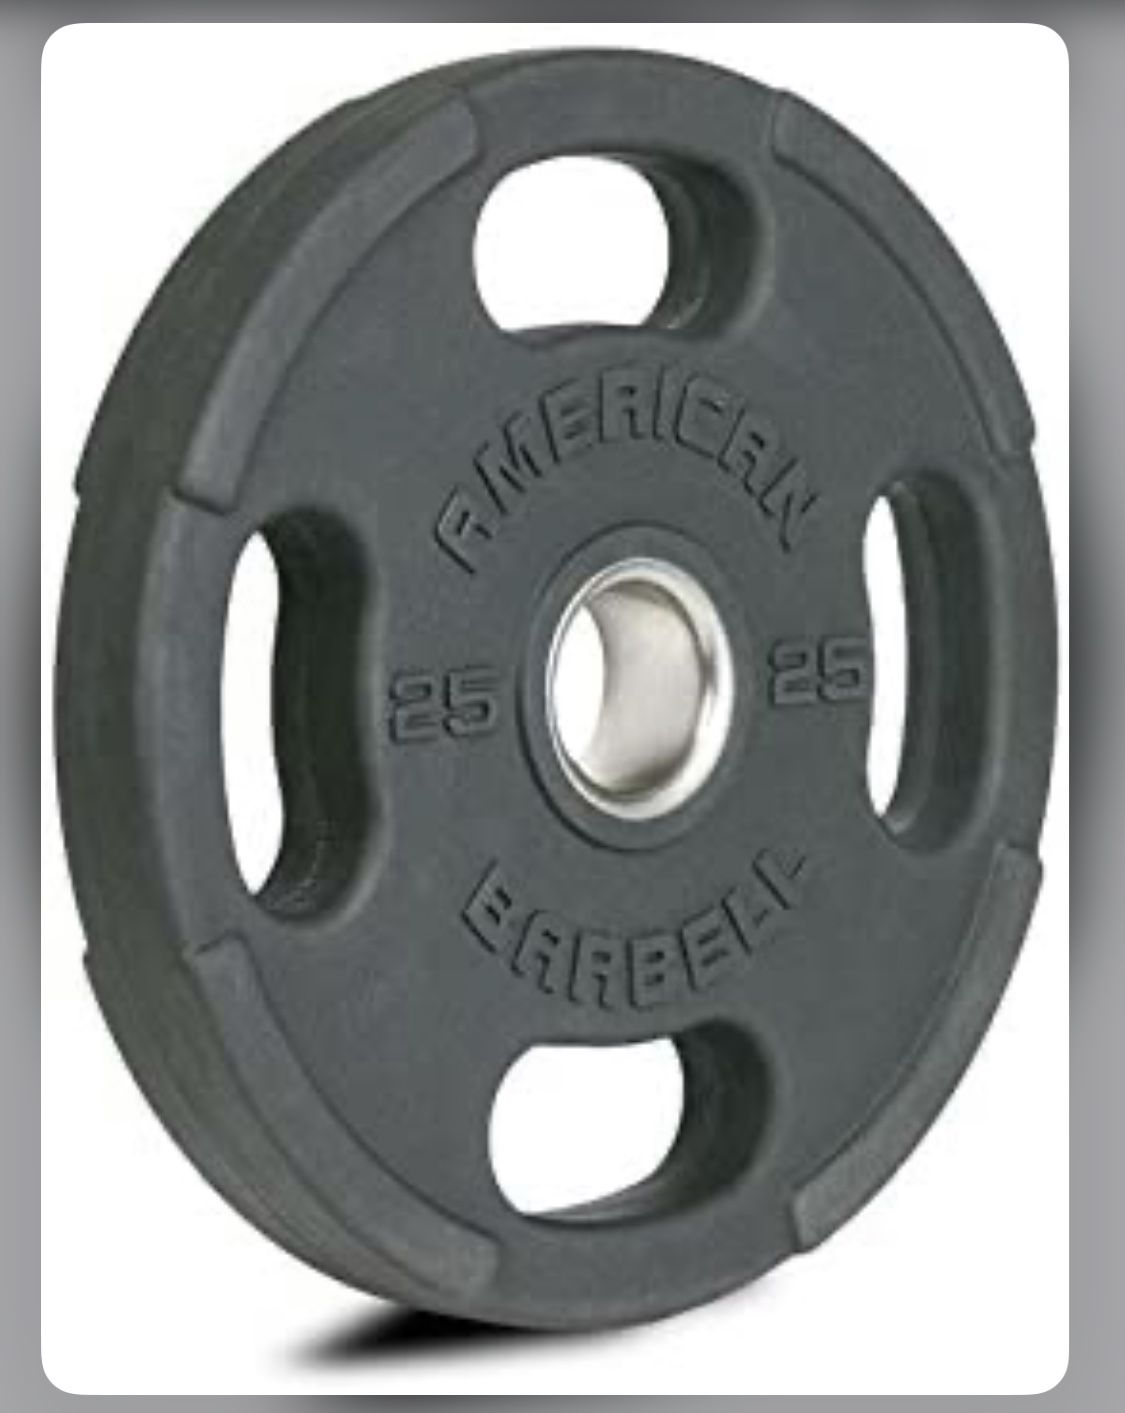 Weights plates (two 25lb plates)